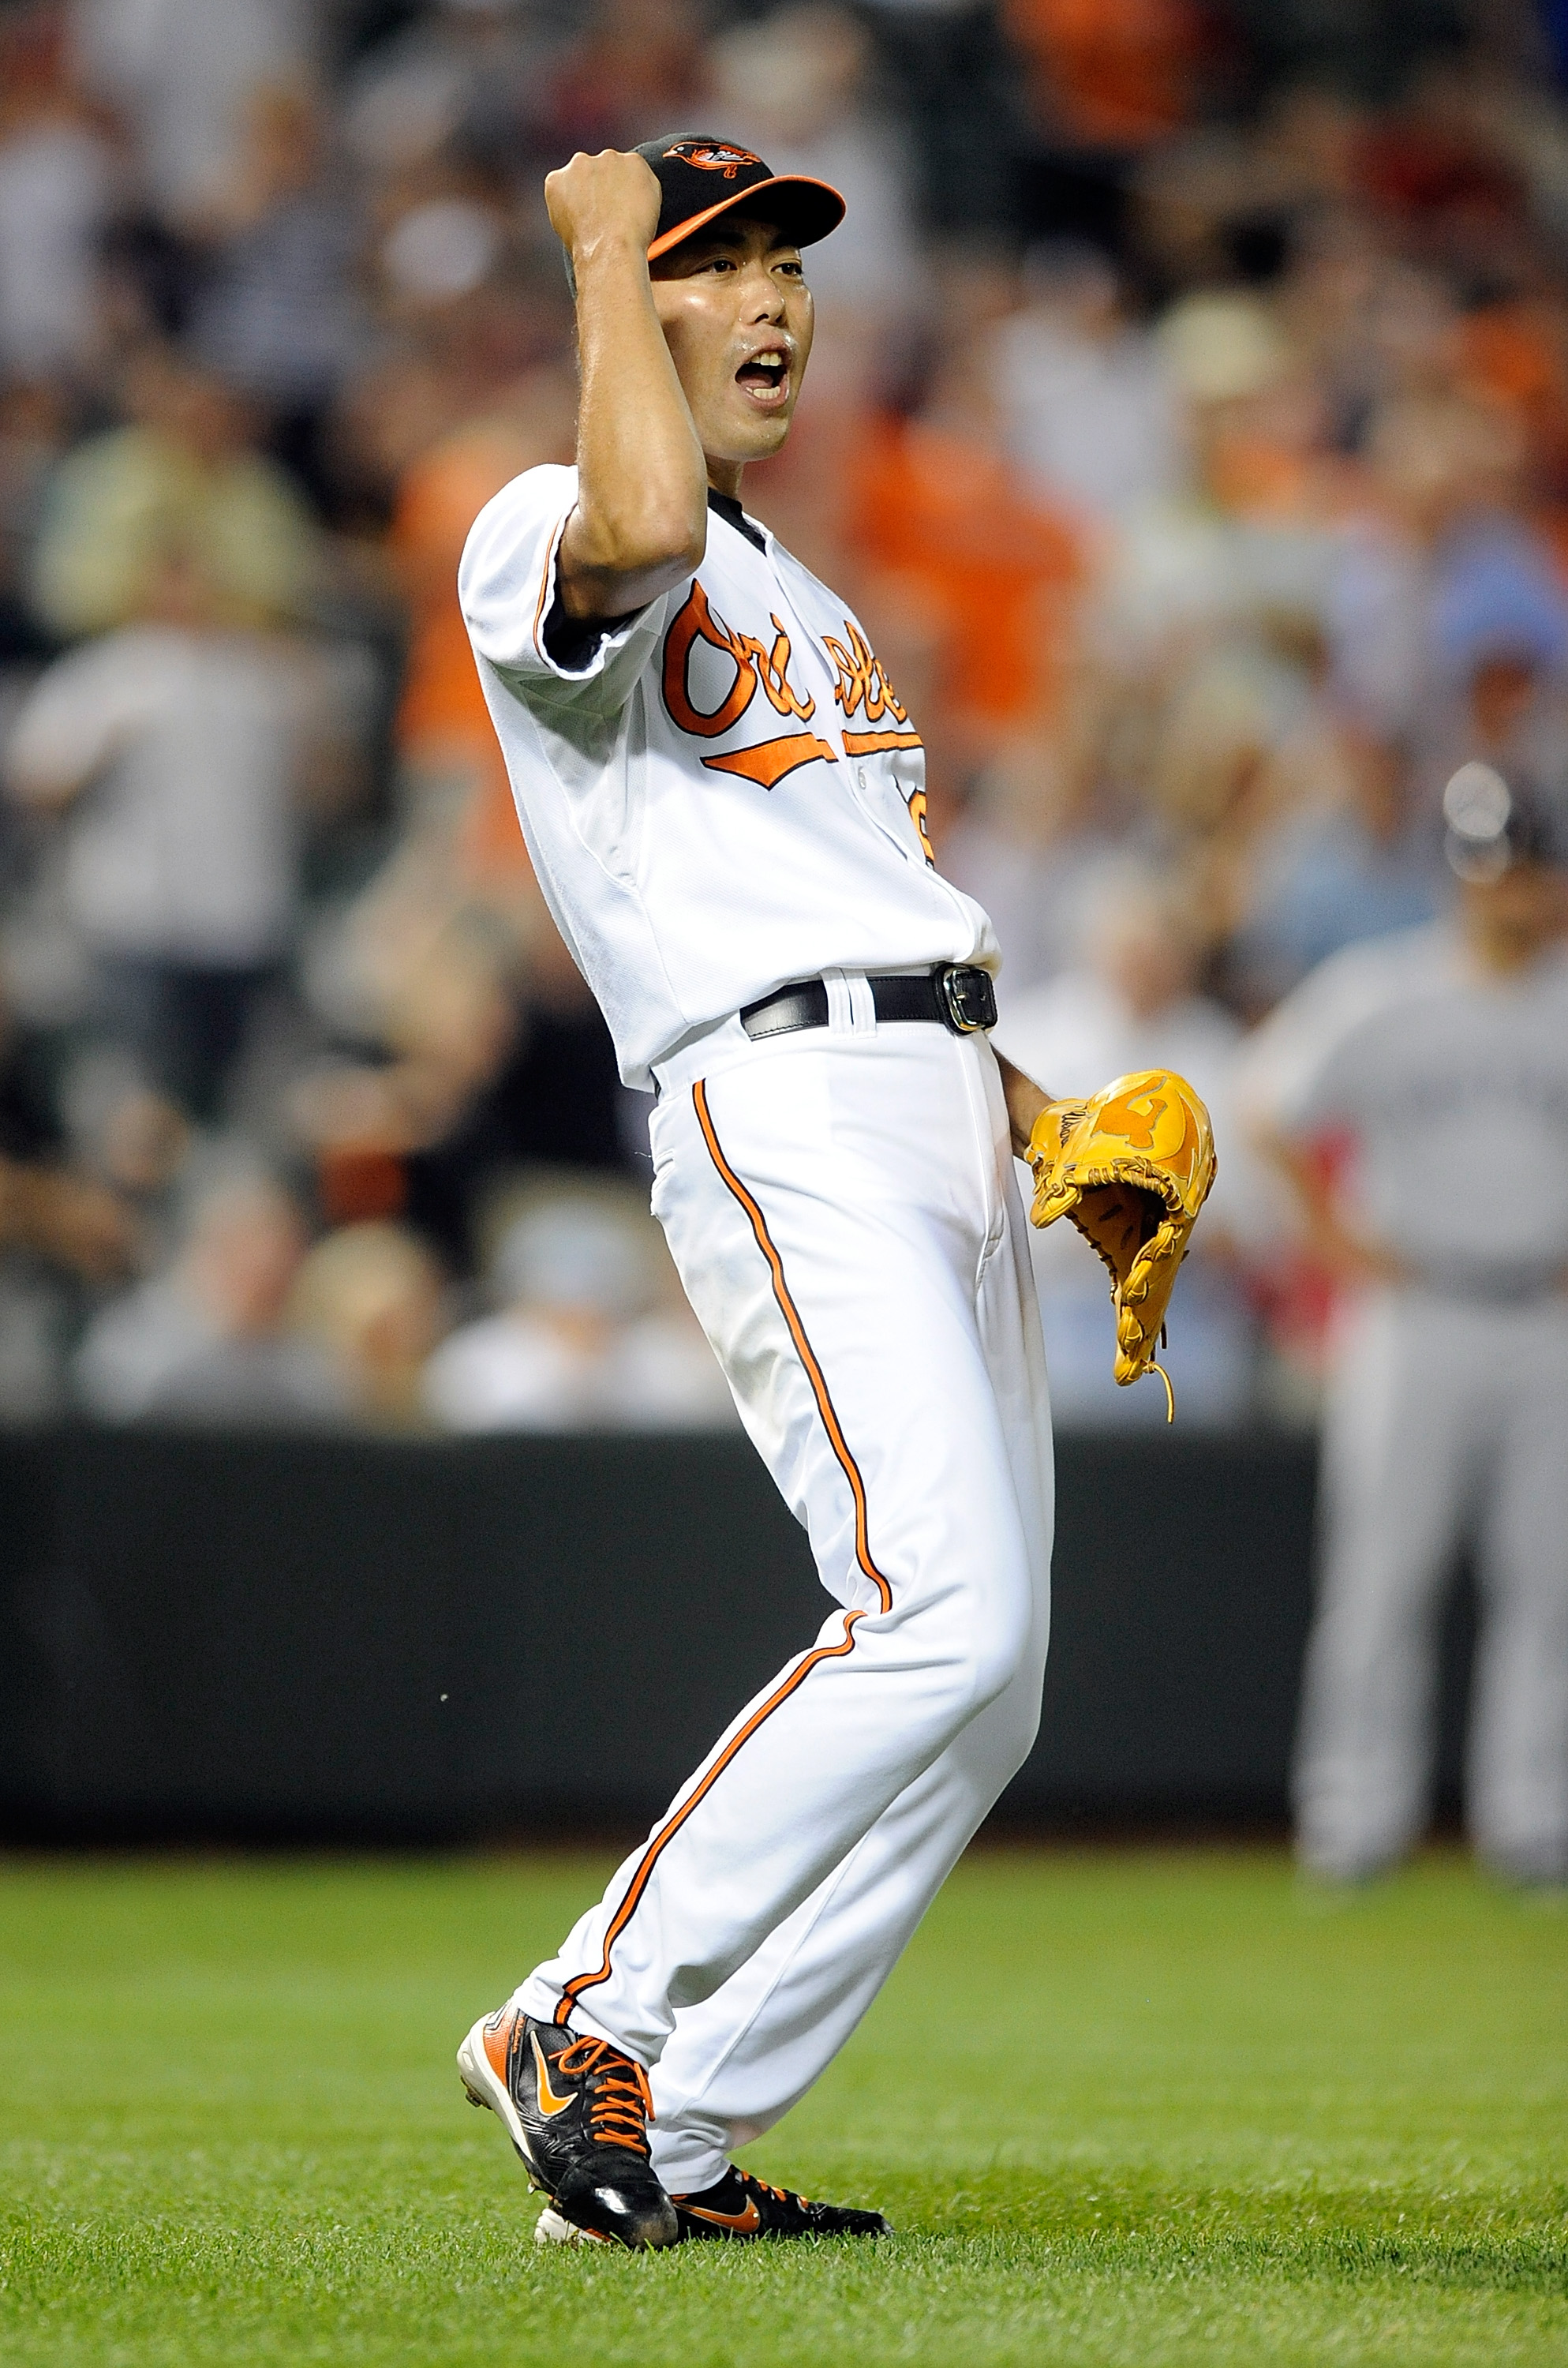 BALTIMORE - AUGUST 31:  Koji Uehara #19 of the Baltimore Orioles celebrates after the final out in a 5-2 victory against the Boston Red Sox at Camden Yards on August 31, 2010 in Baltimore, Maryland.  (Photo by Greg Fiume/Getty Images)